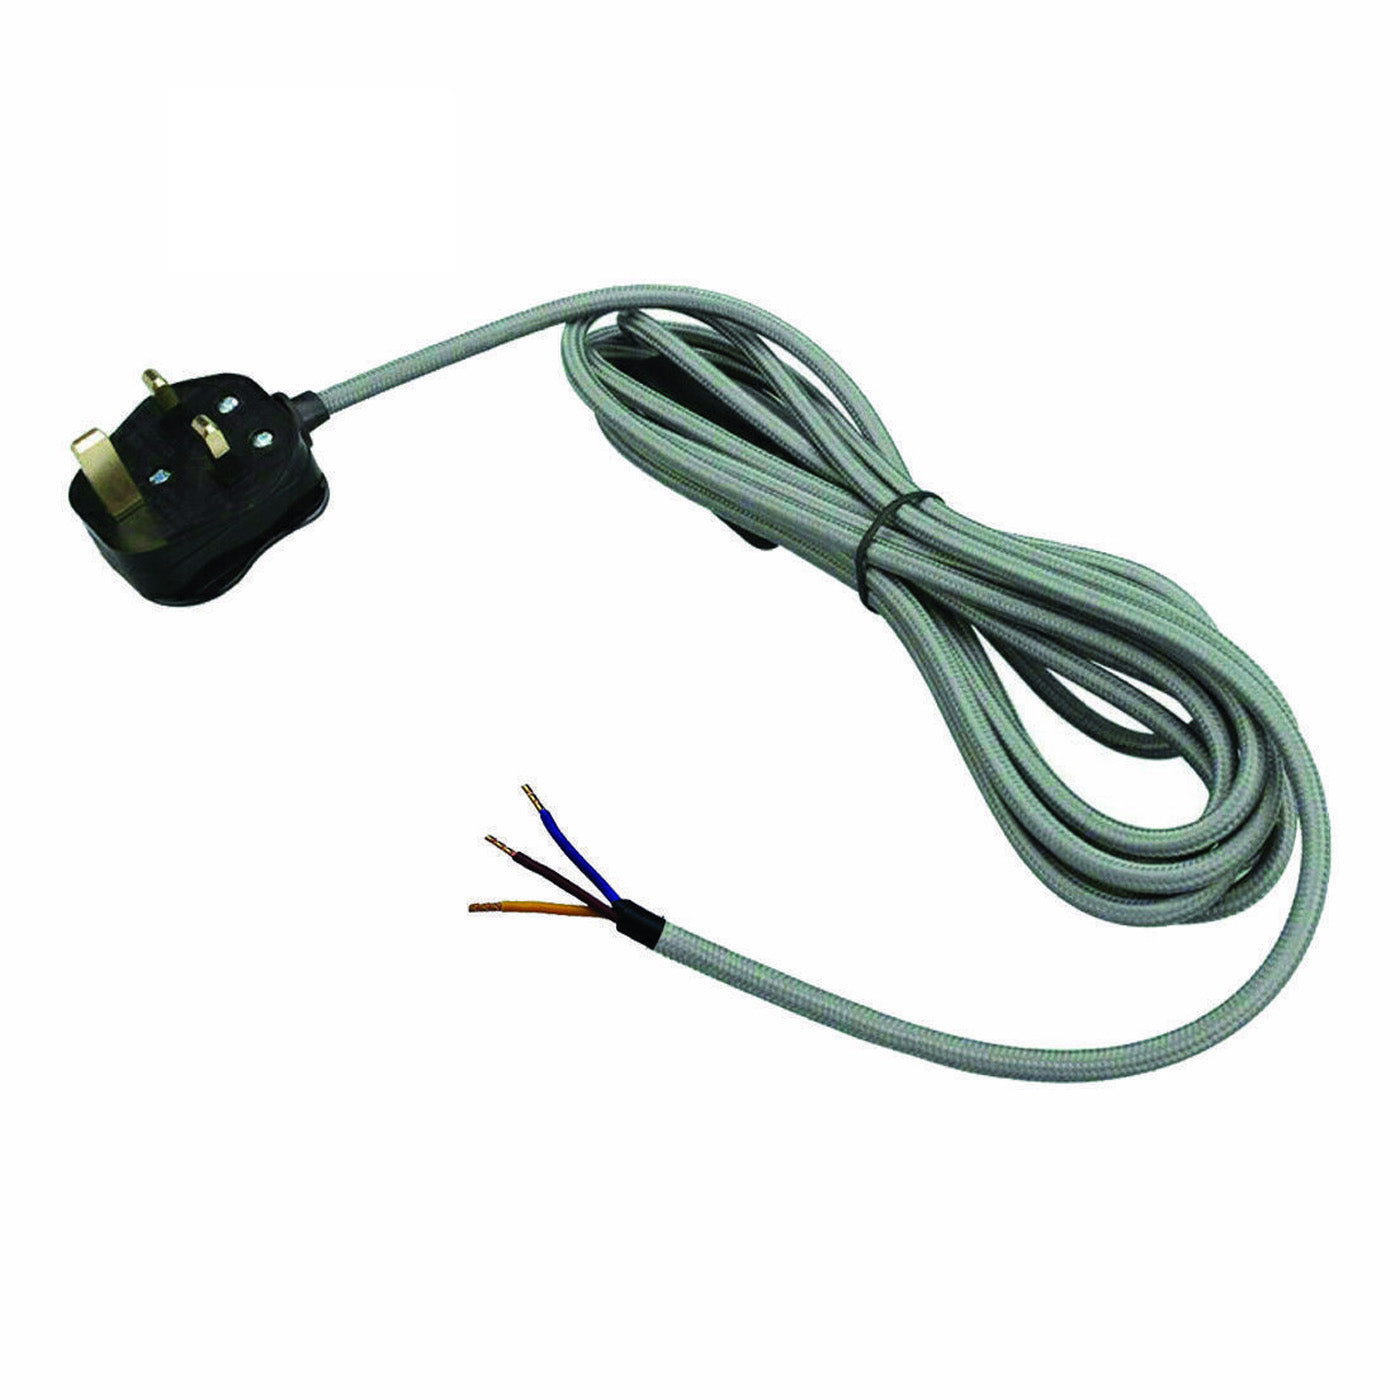 Dimmer Switch 2m Fabric Flex Cable Plug In Pendant With Short Holder~1611 - Electricalsone UK Ltd